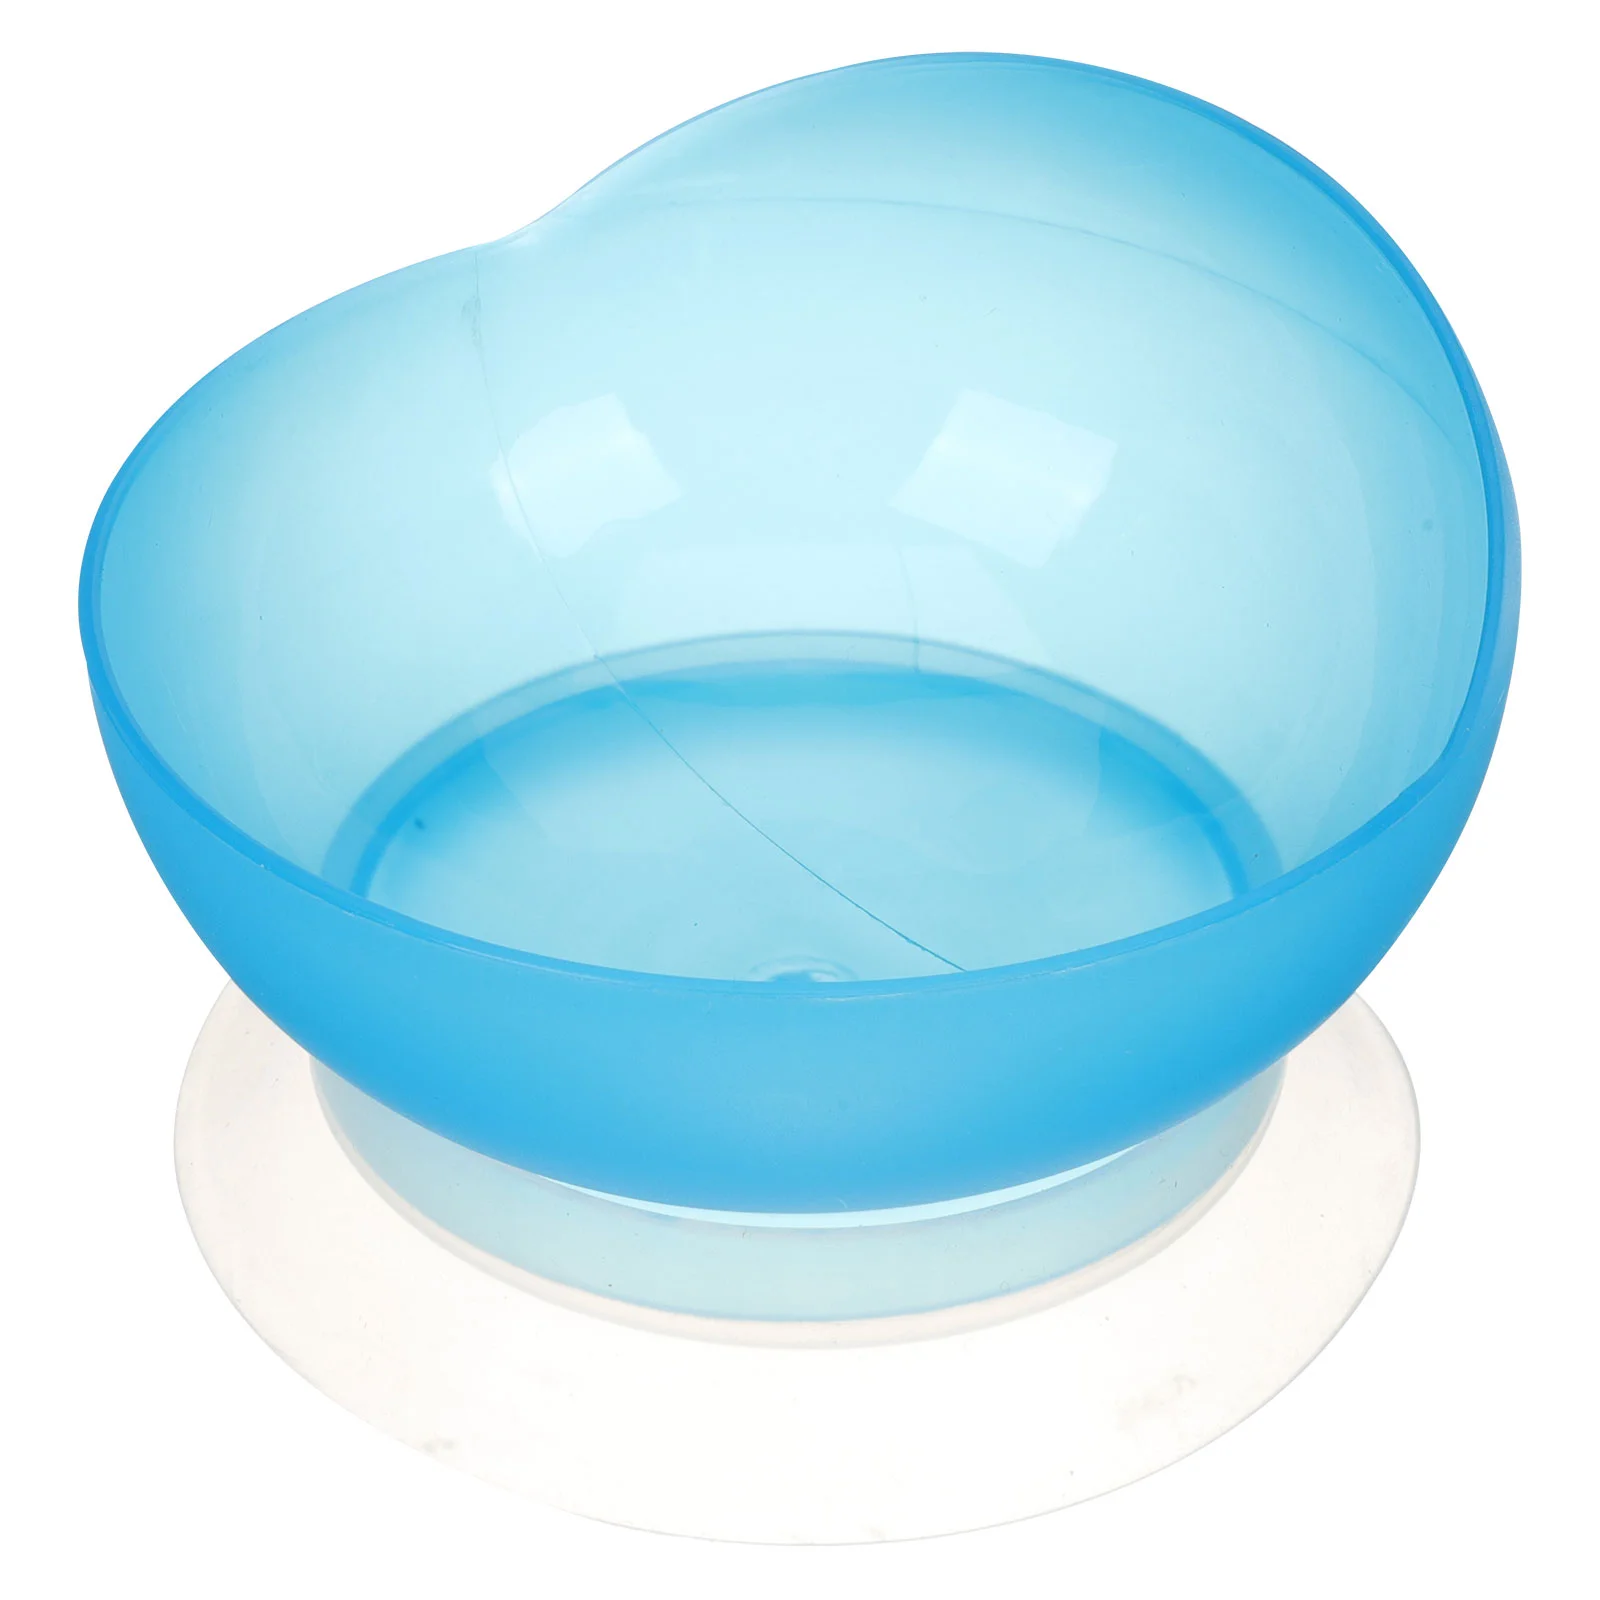 

Bowls Bowl Suction Silicone Cup Dish Seniors Baby Disabled Feeding Plate Elderly Snack Elder Dining Parkinsons Adaptive Sucker